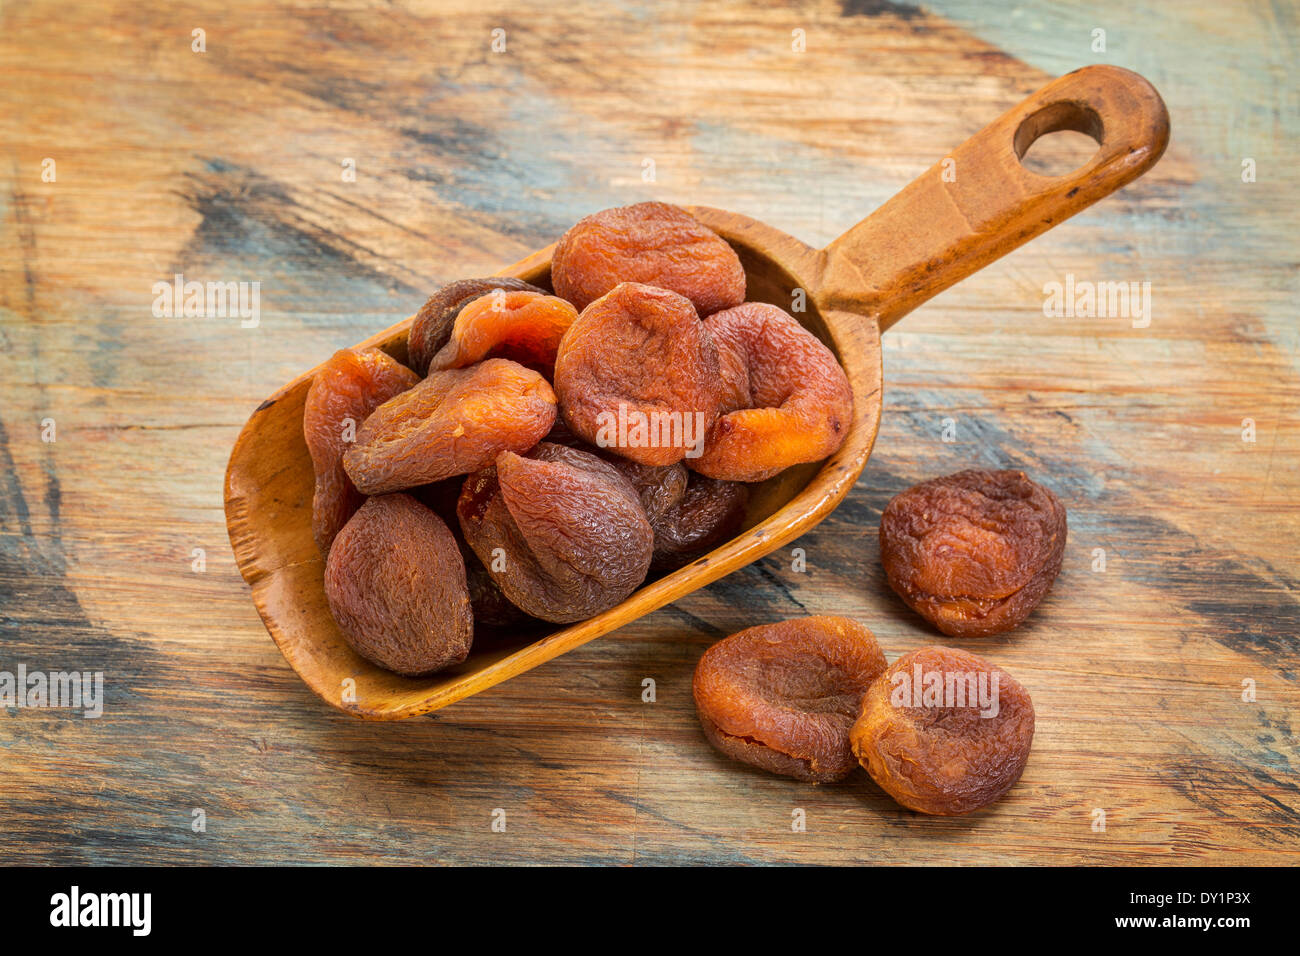 a pile of sun dried Turkish apricots on grunge painted wood surface Stock Photo